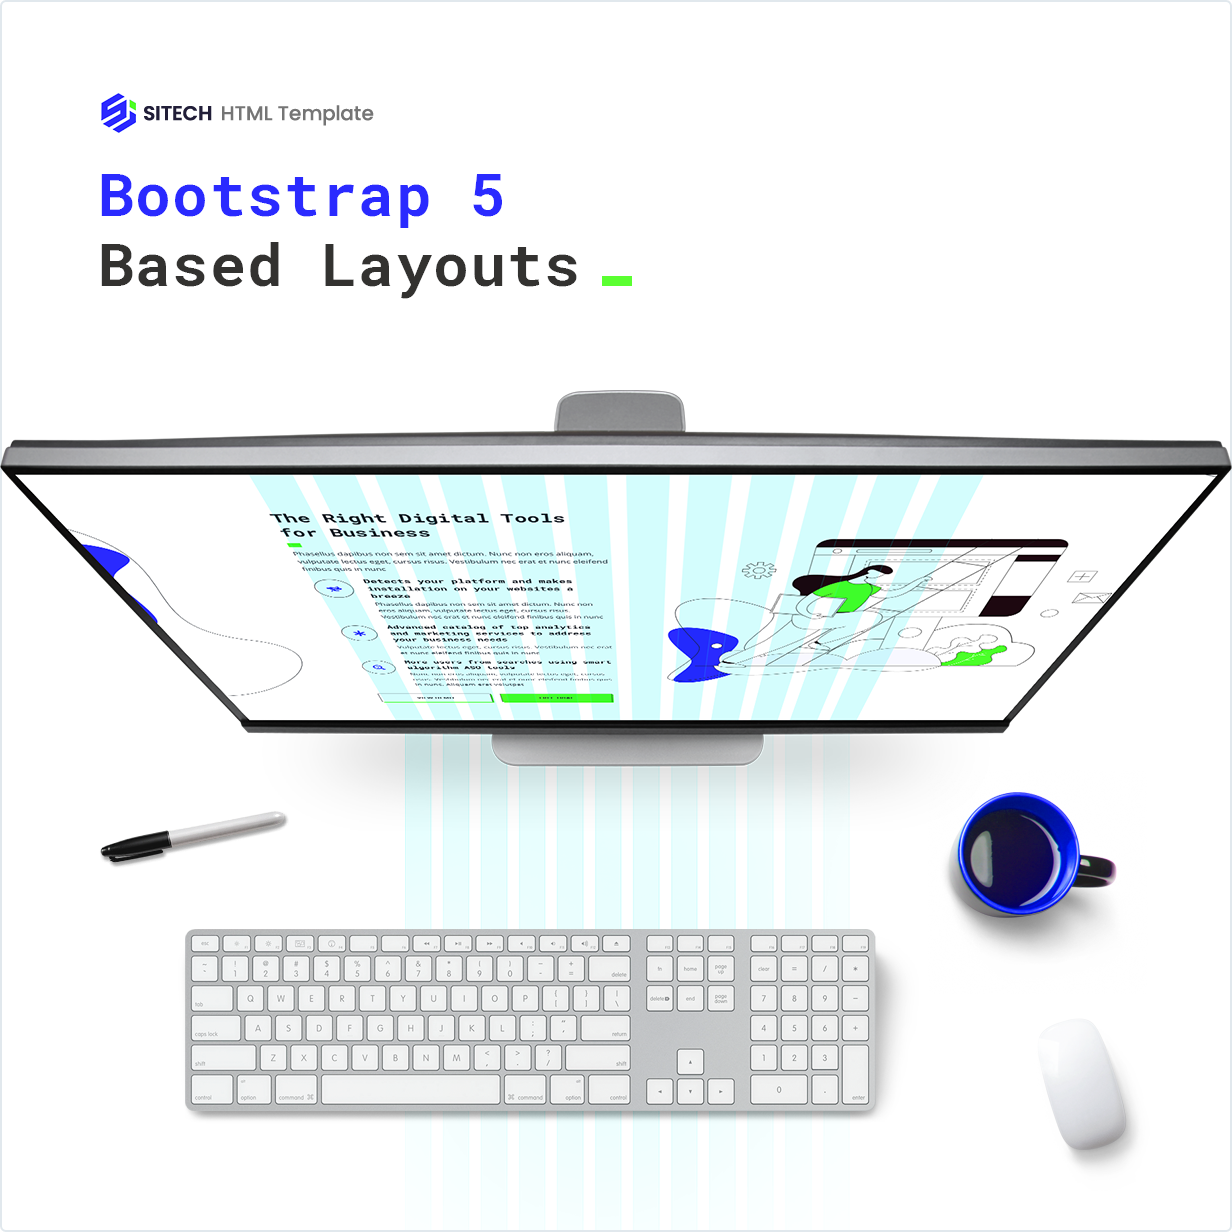 Bootstrap 5 Based Layouts